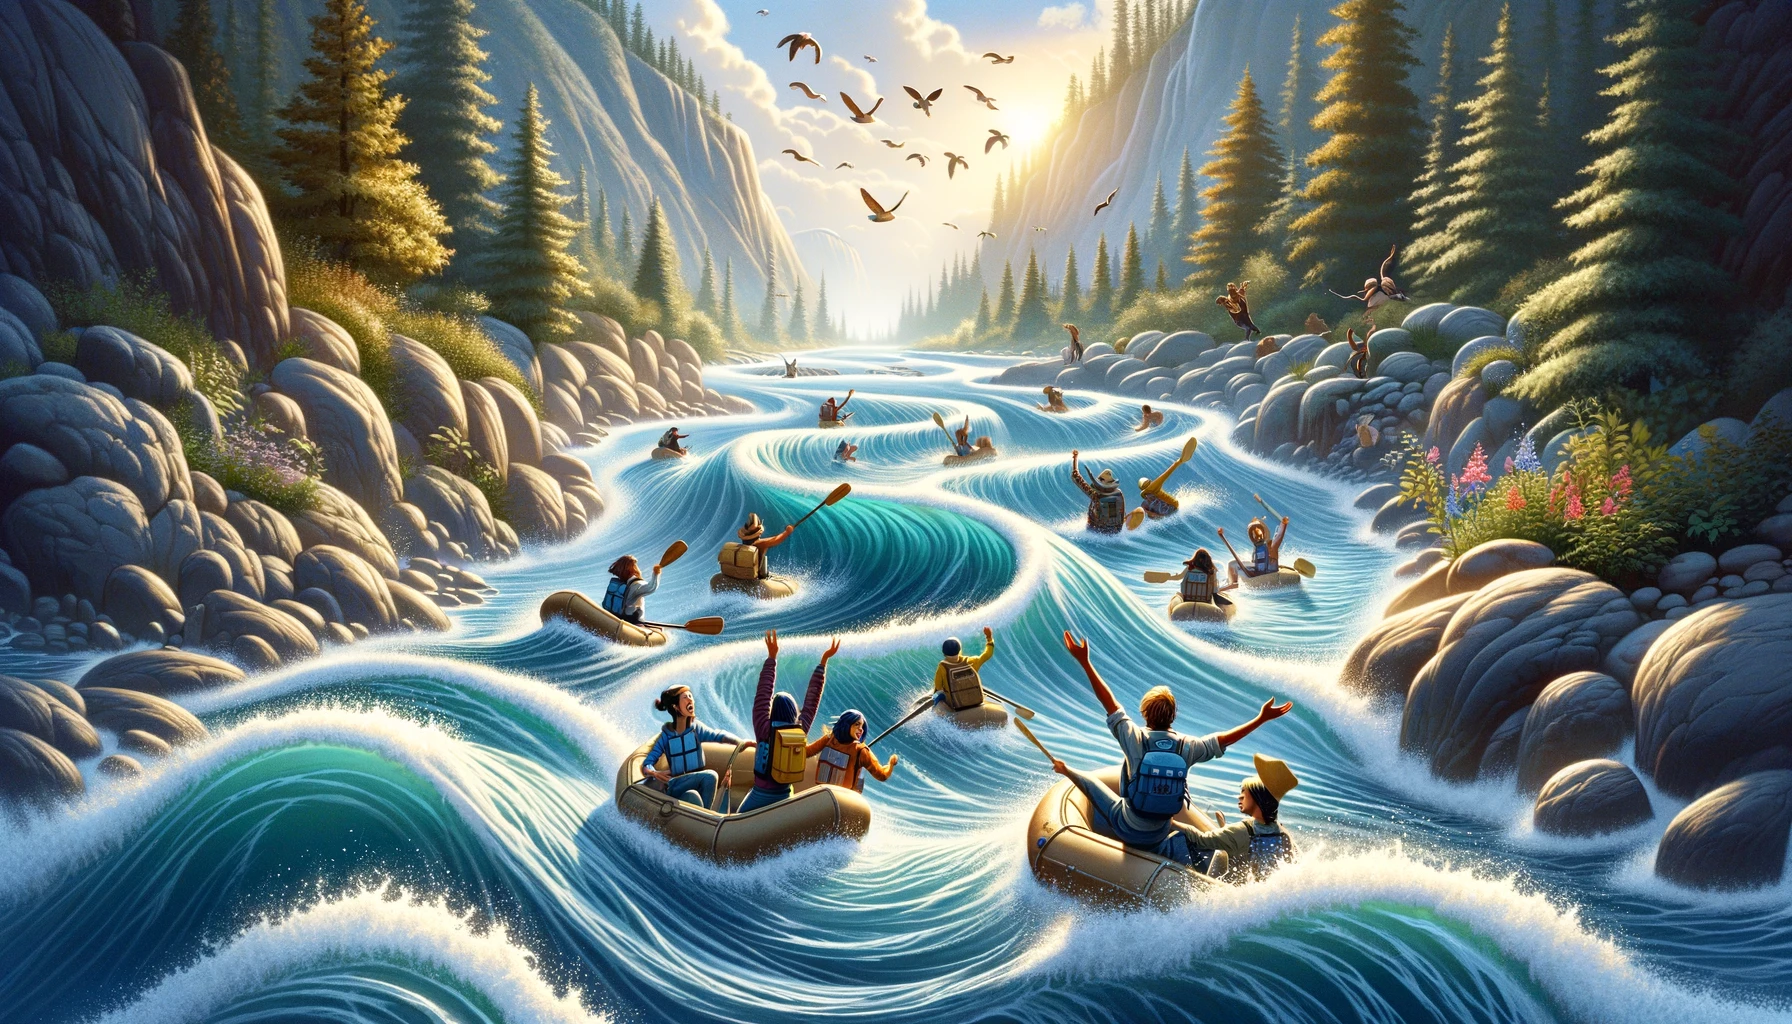 A visual metaphor depicting life as a dynamic, flowing river, with adventurous individuals navigating its course. The image conveys the excitement and joy of exploring life's mysteries, embodying the spirit of fearless adventure and the love for the great outdoors.